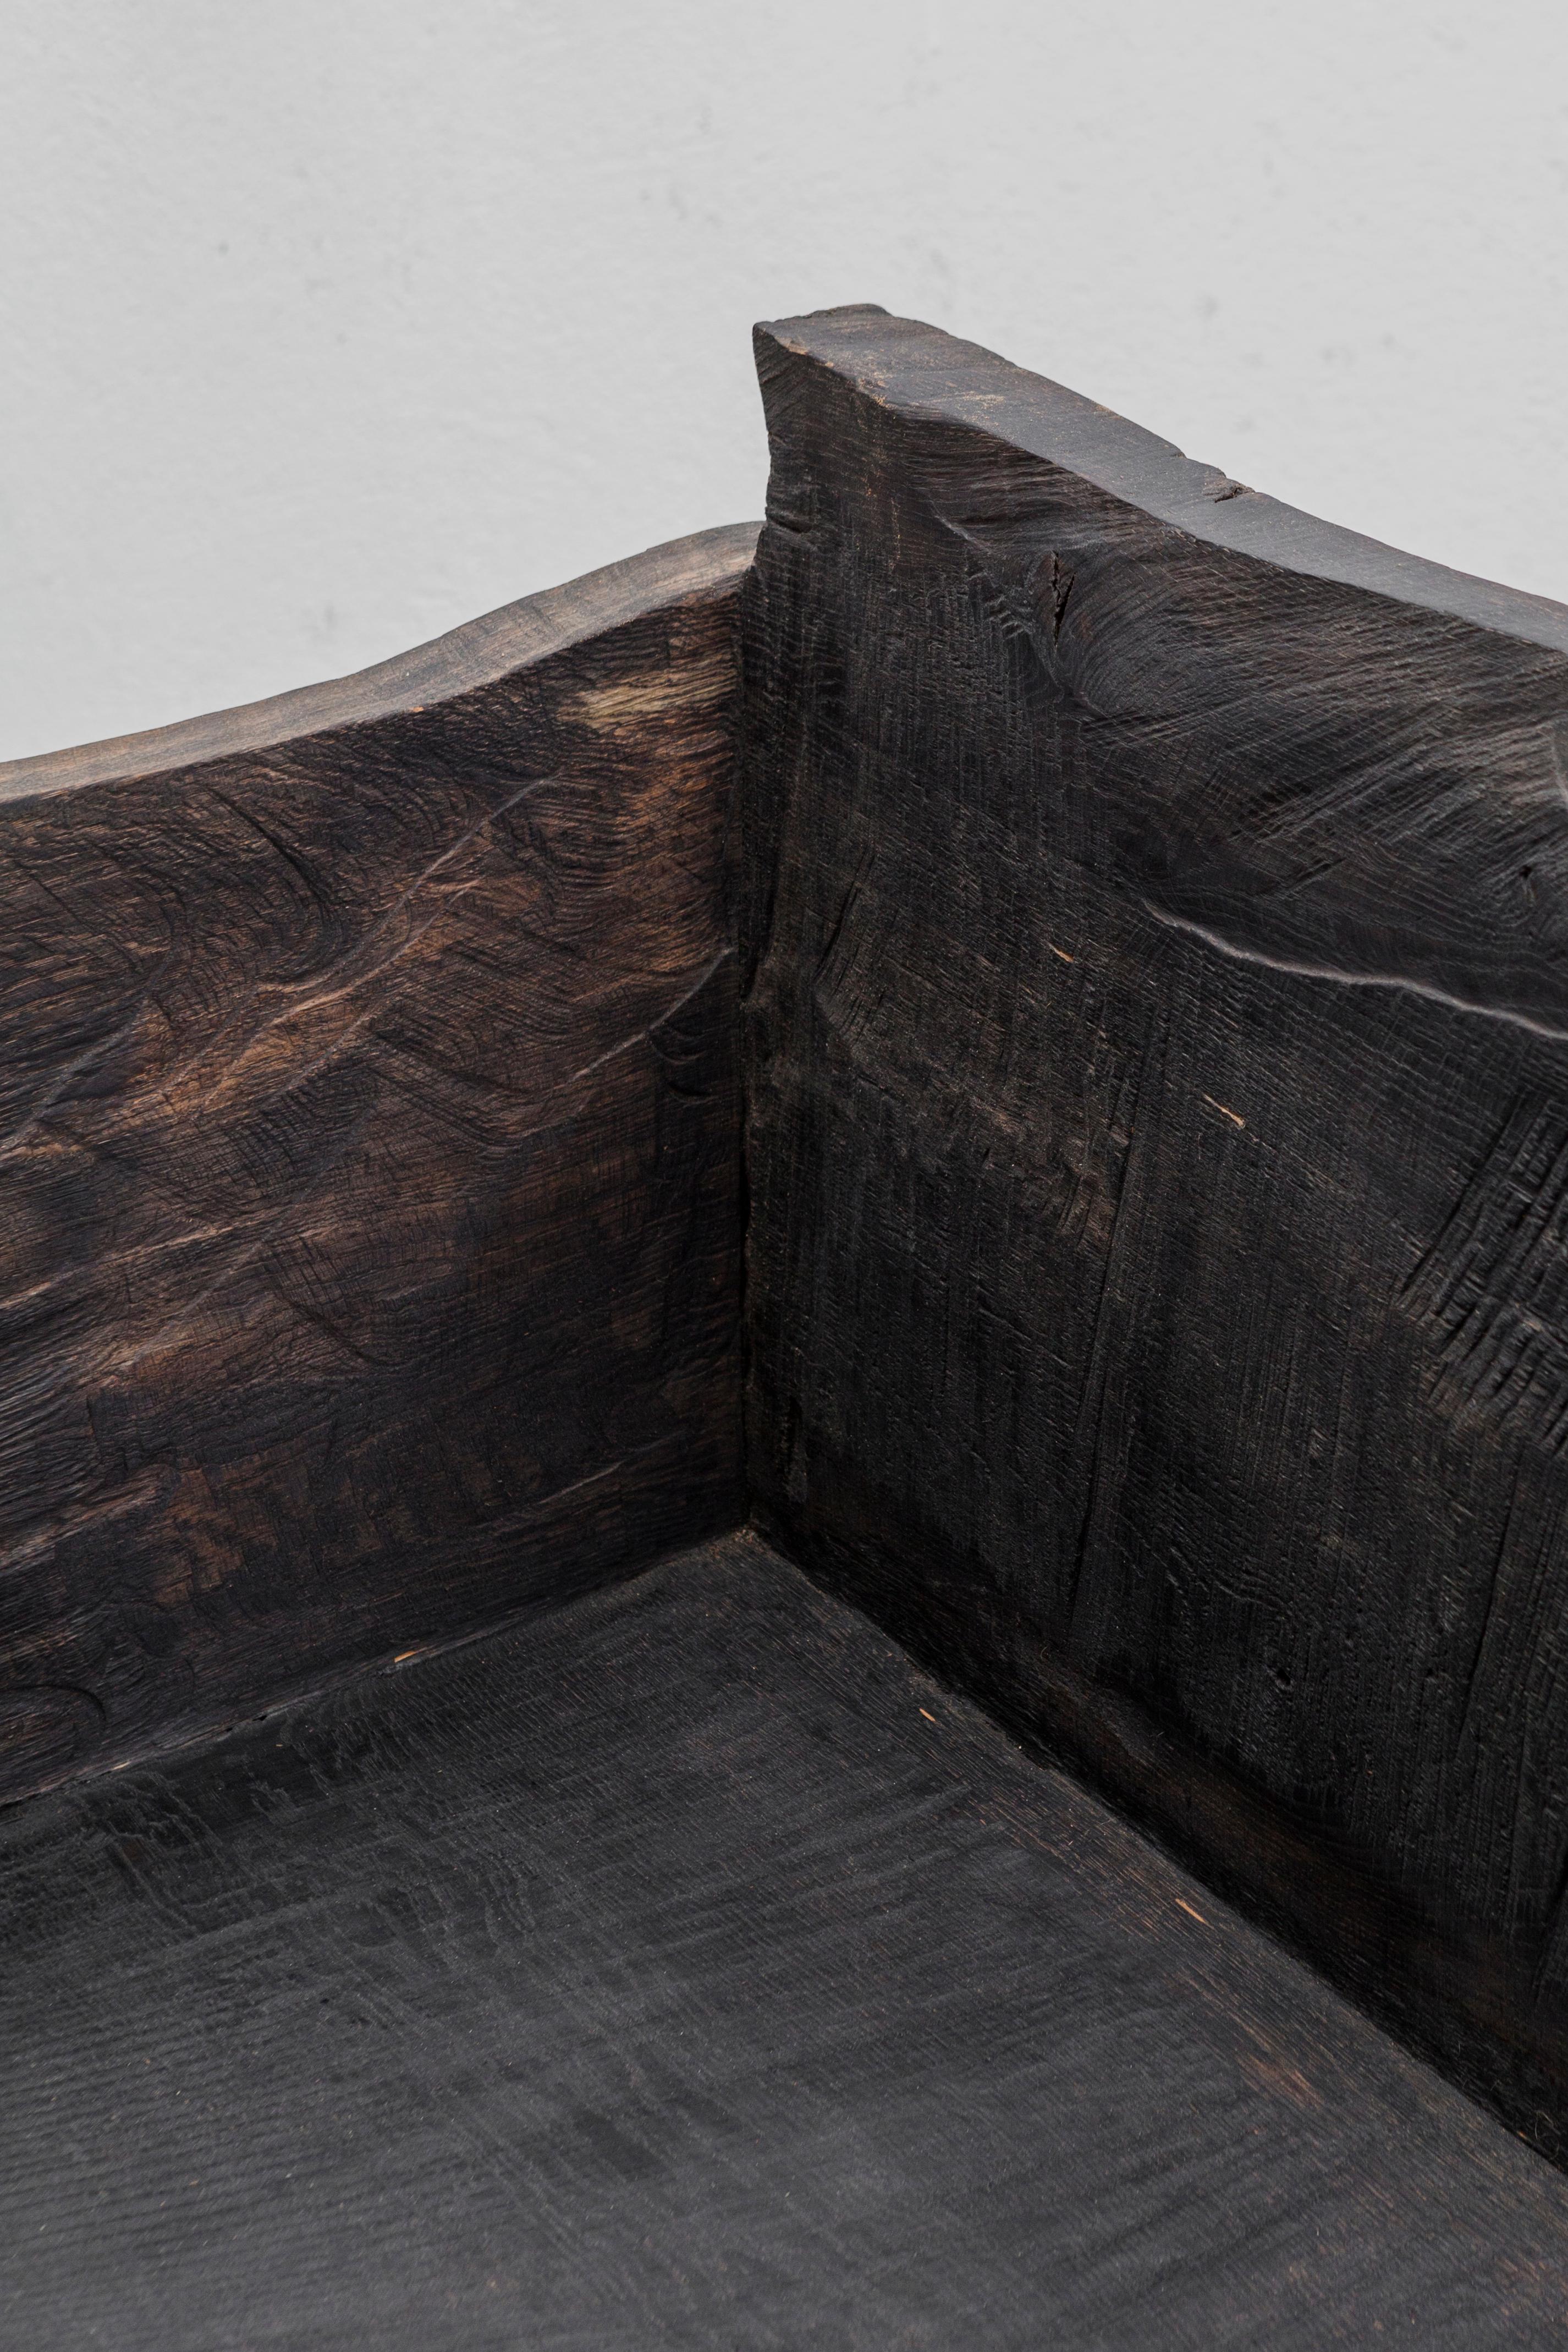 Brutalist Bench
Bench made of solid oak (+ linseed oil).
Measures: 90 x 185 x 60 cm.

SÓHA design studio conceives and produces furniture design and decorative objects in solid oak in an authentic style. Inspiration to create all these items comes